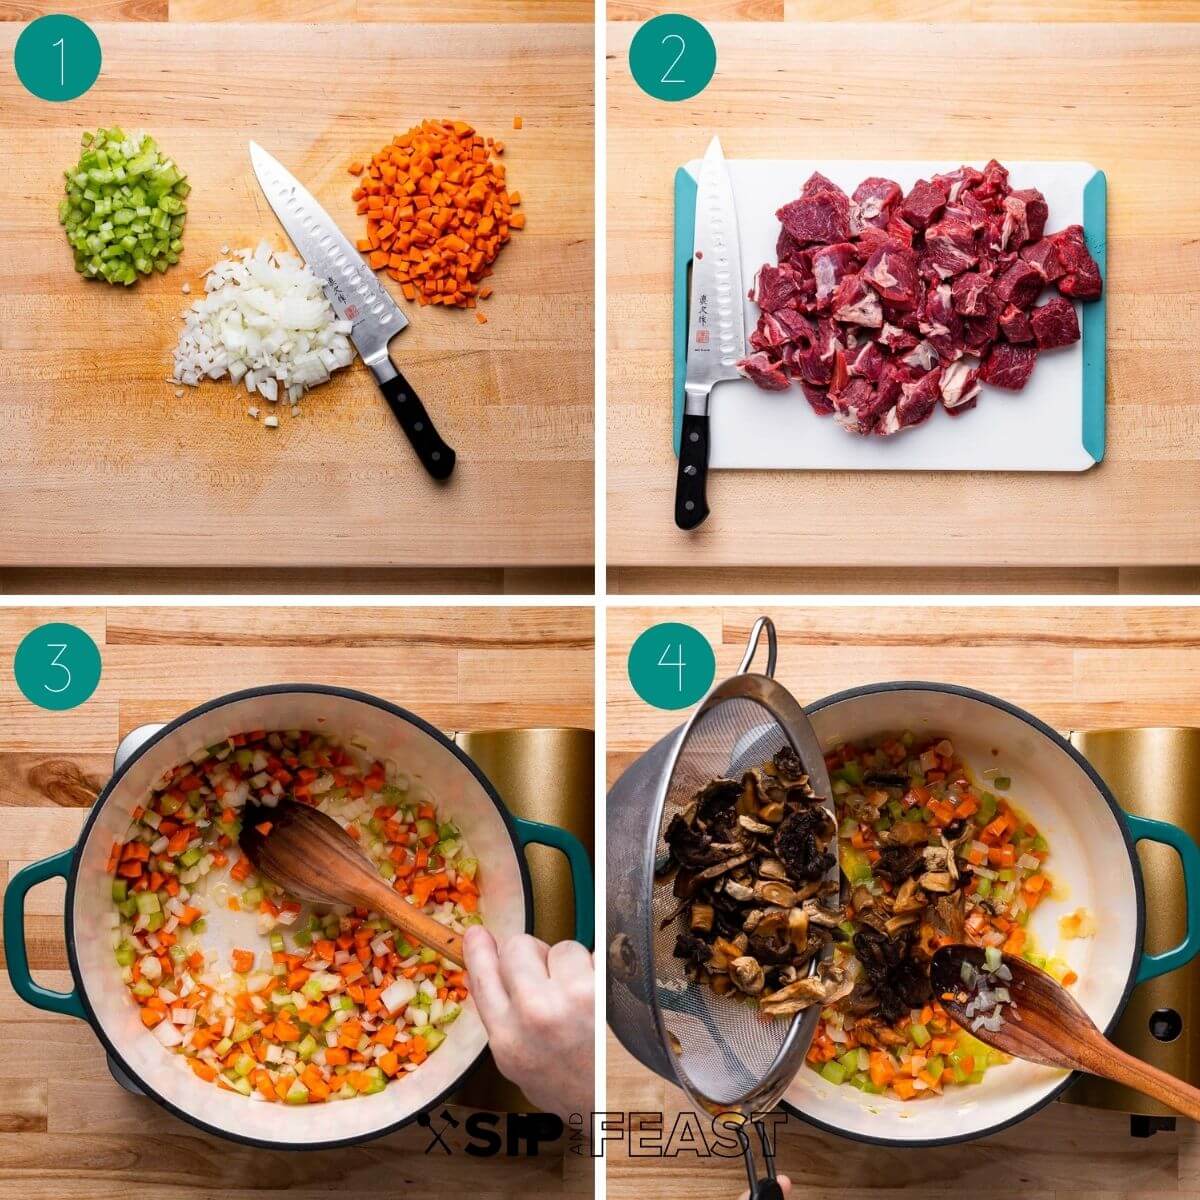 Italian beef stew recipe process shot collage group number one shwoing chopped veggies, cubed beef, sauteed veggies and mushrooms.